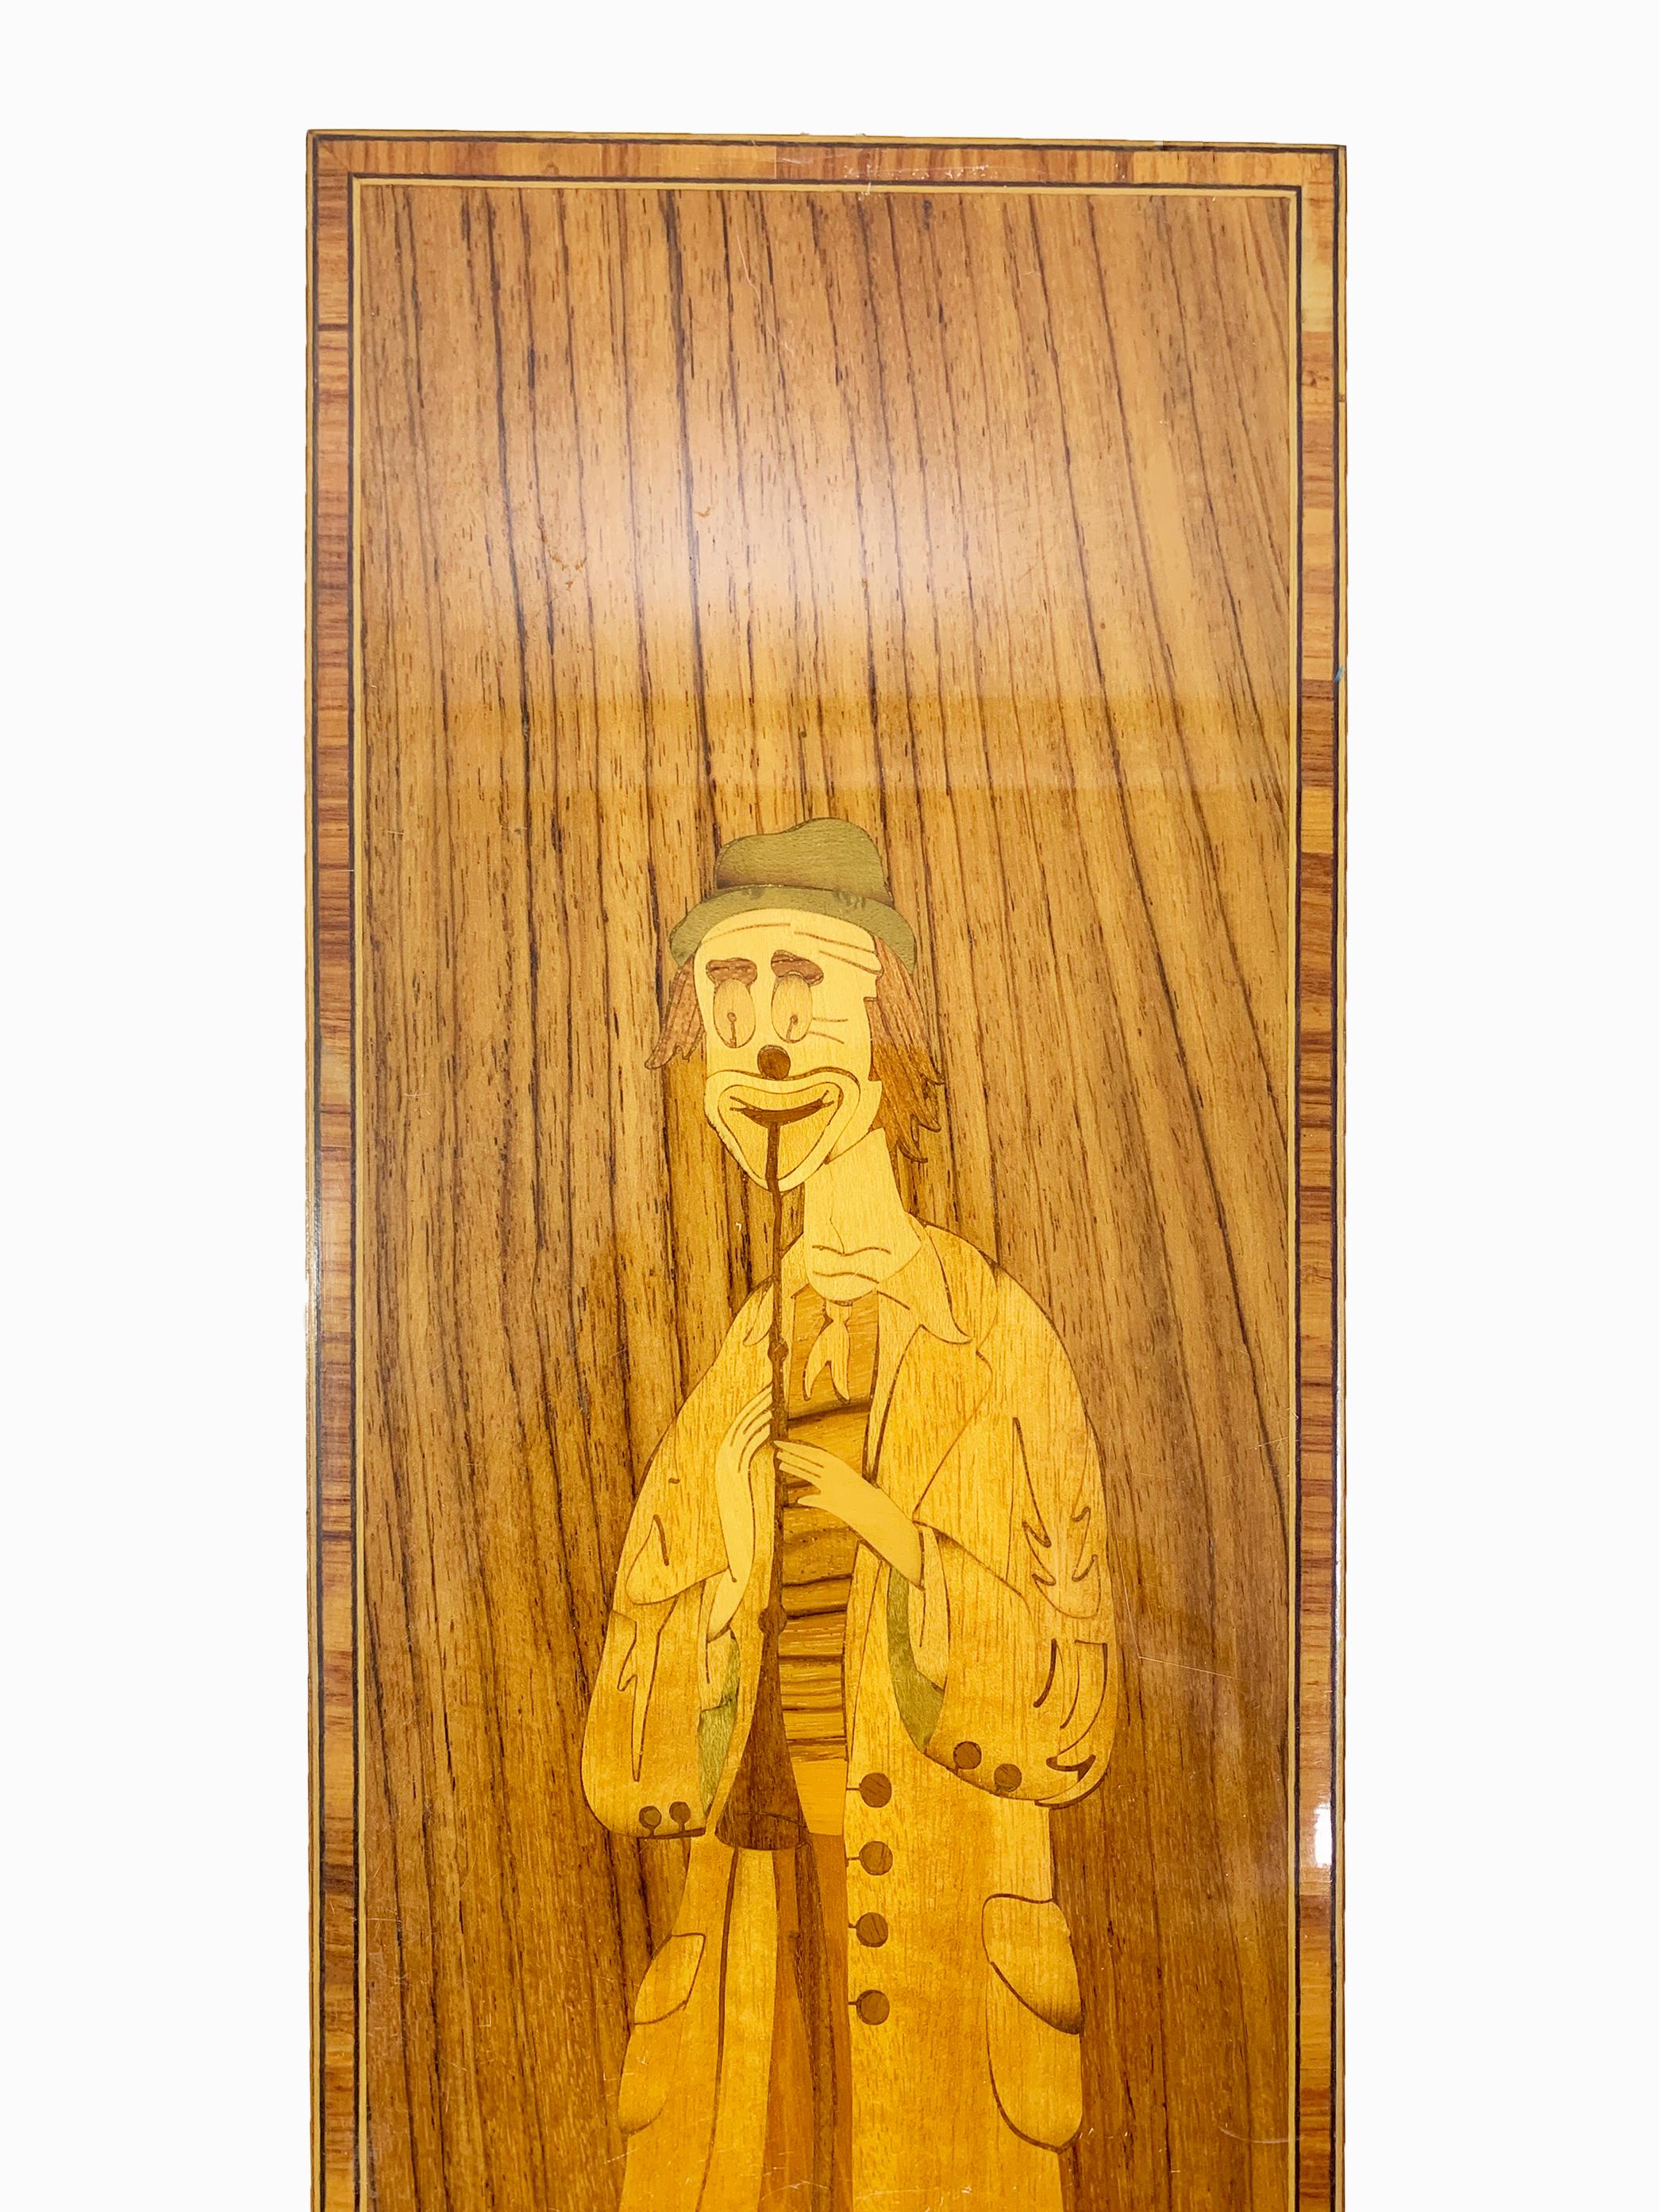 Set 2 of 3 Vintage Italian Marquetry Wood Inlay Musician Clowns Panels Stamped  For Sale 1